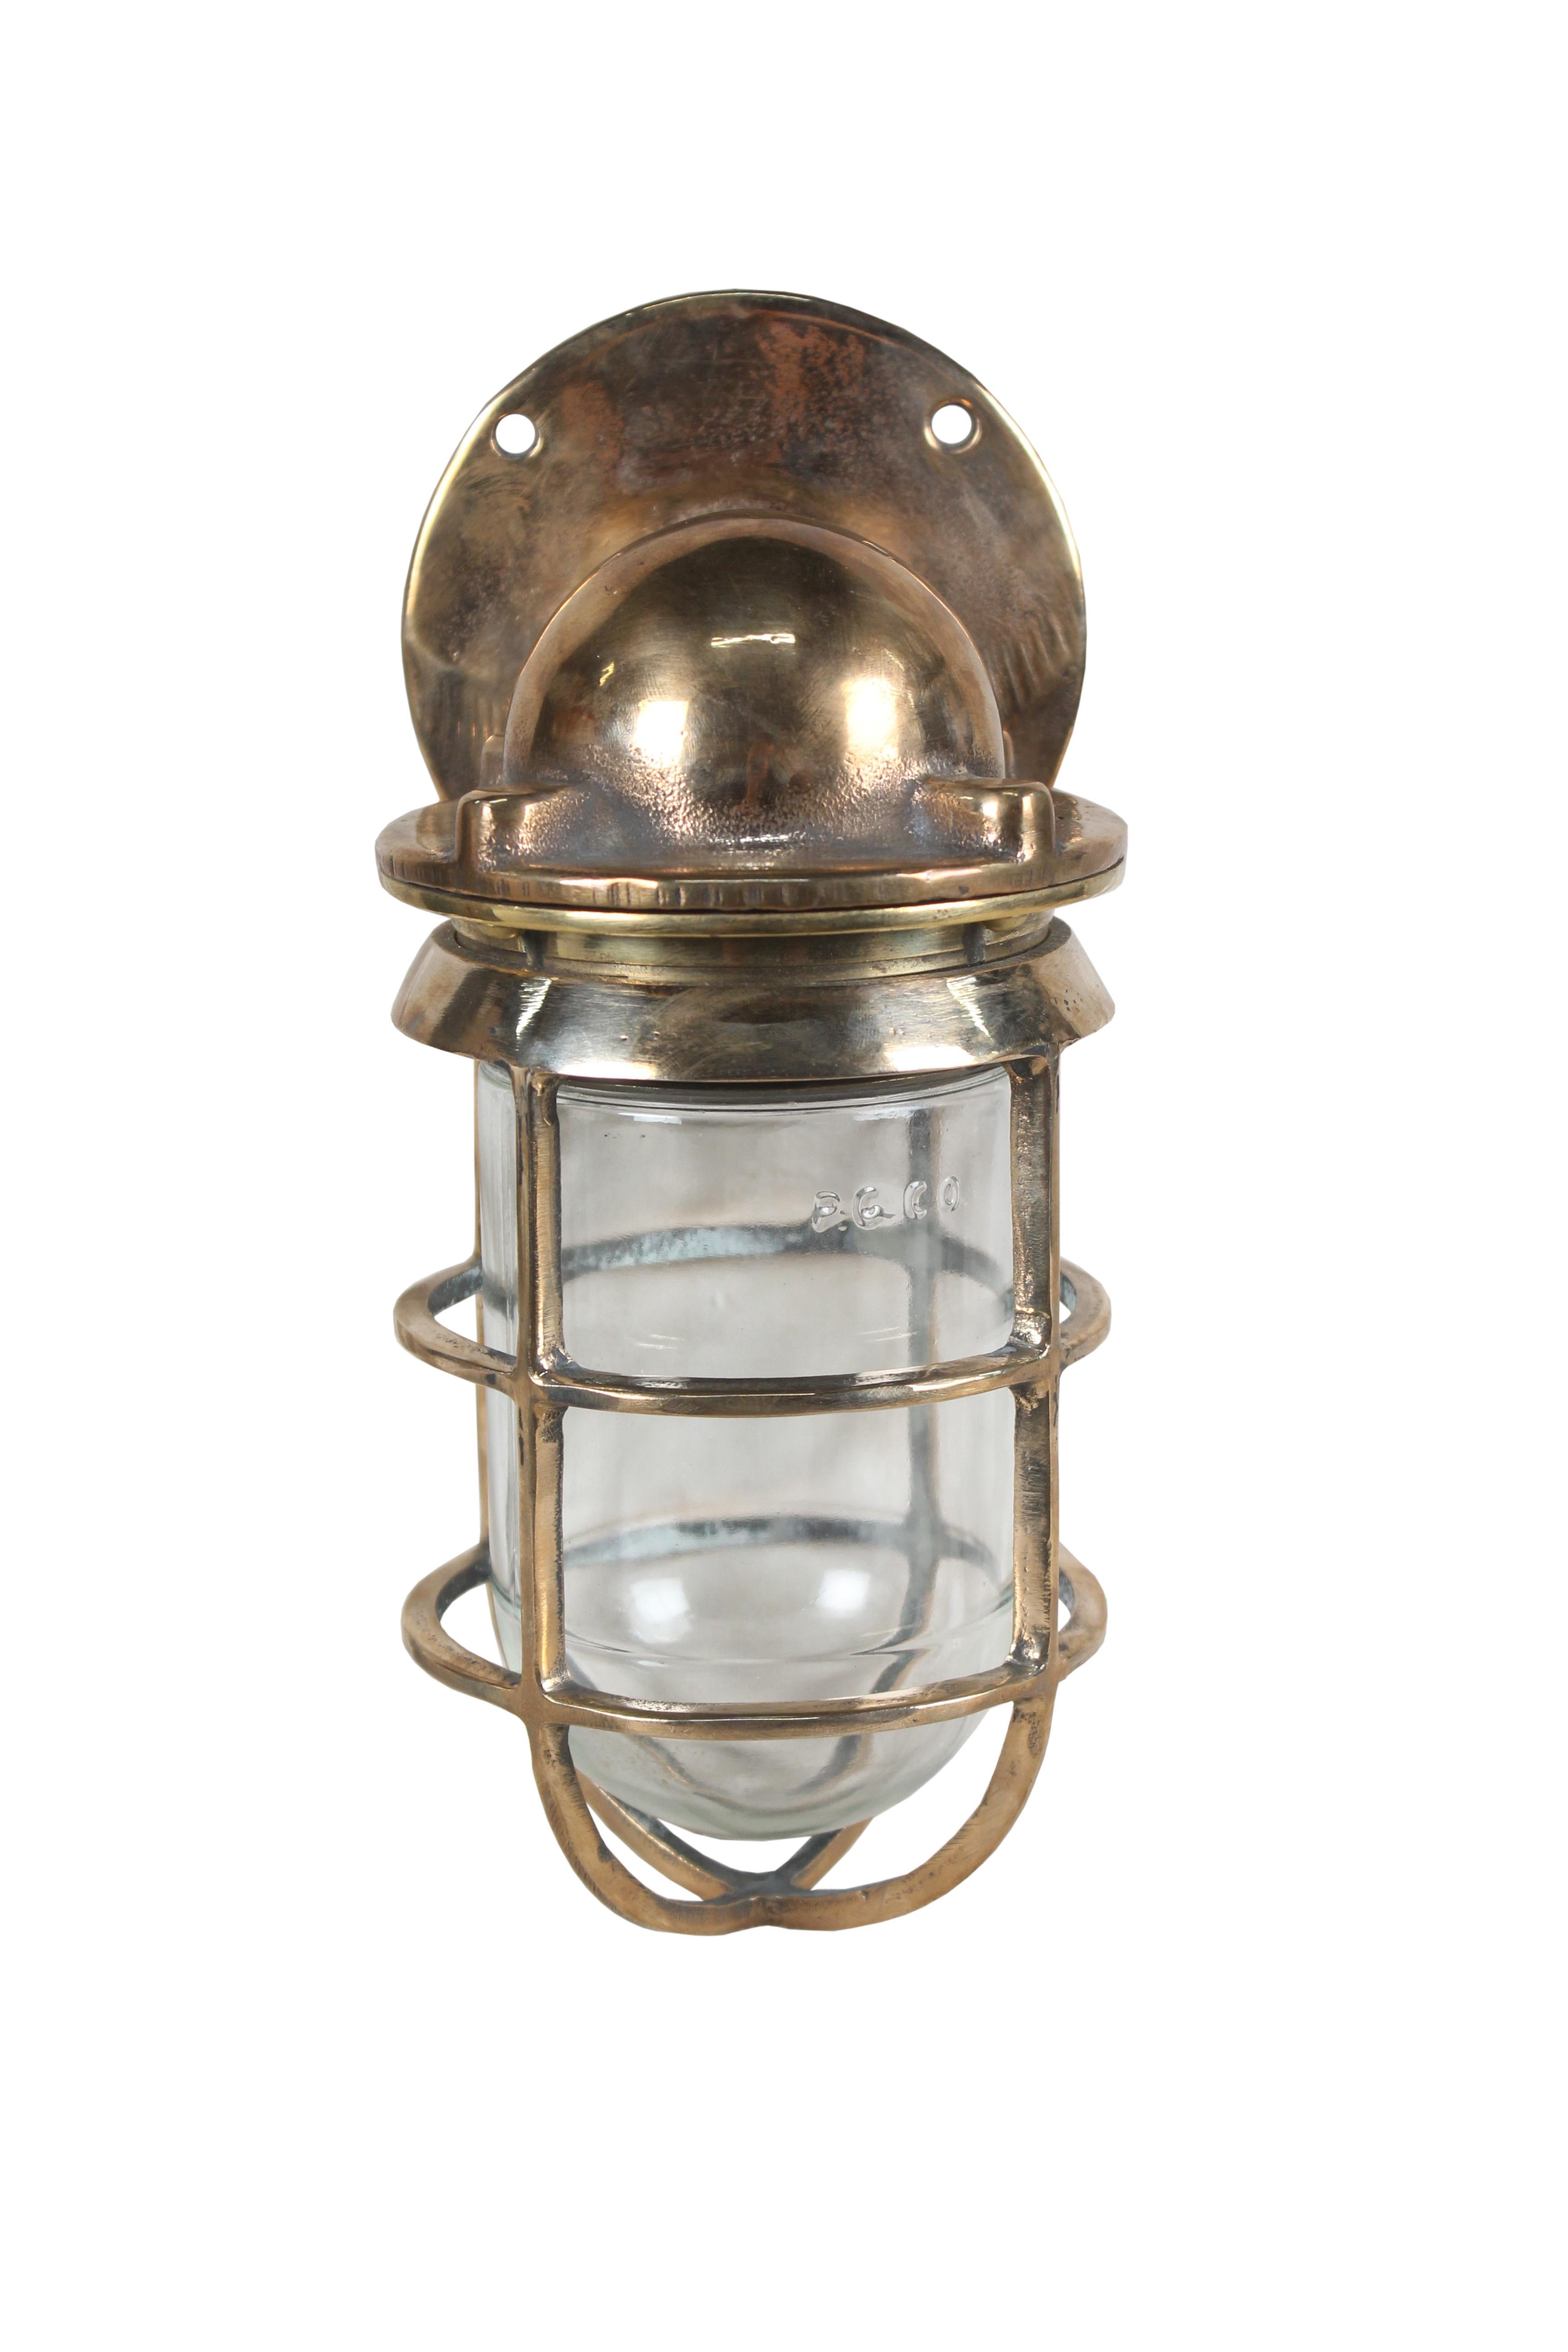 Pair of bronze ship's passageway sconce lights with bronze cage and glass shade. Both the cage and shade unscrew separately to gain access to the bulb. They take a standard base bulb and have been rewired. American, 1970s.